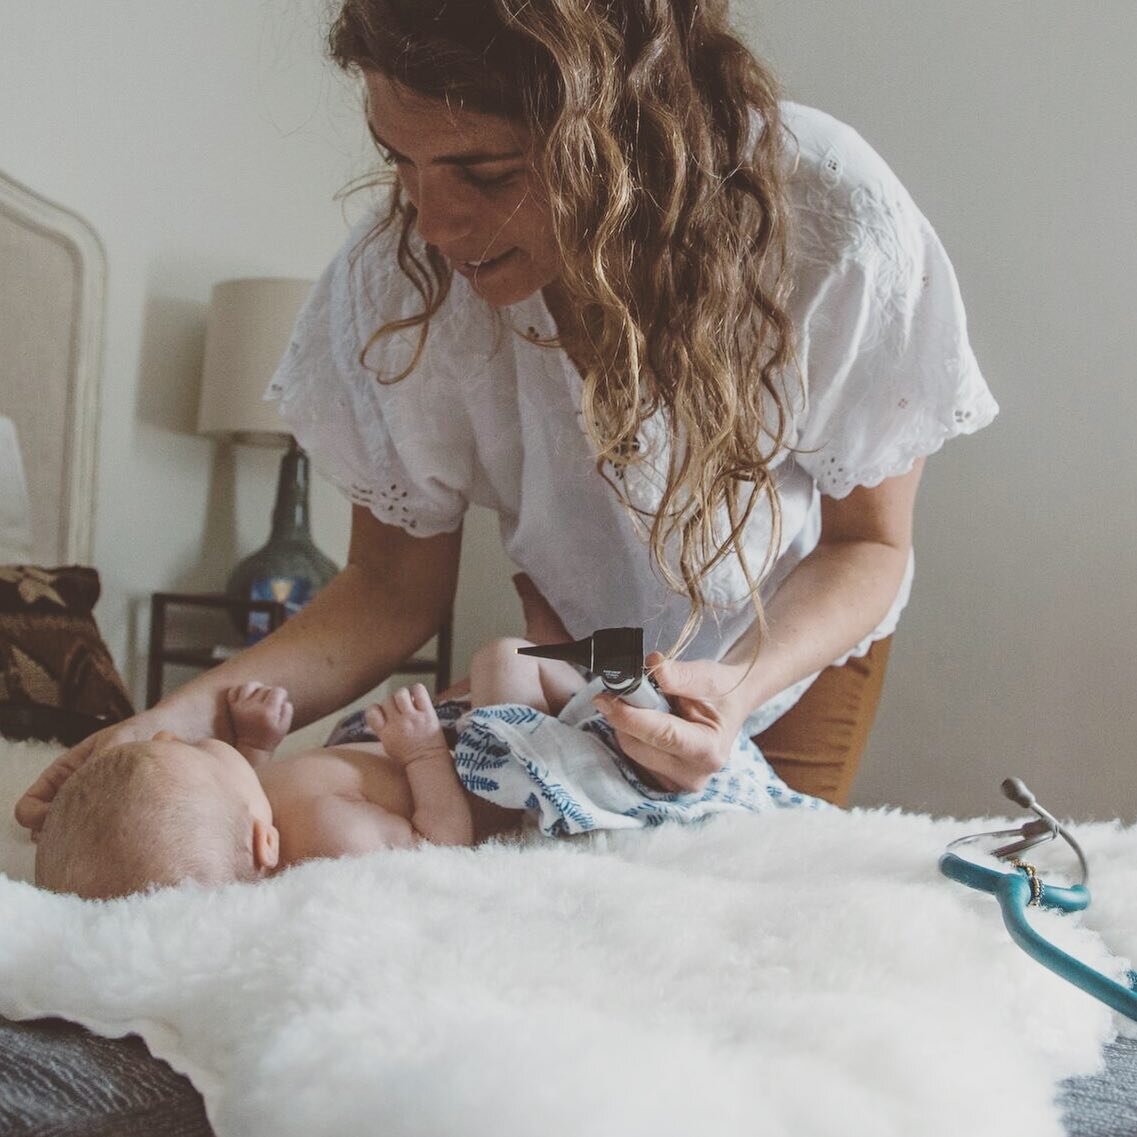 I started this practice because when I had my own babies this is the care that I feel we deserved as human beings. It does not take a medical degree to feel uneasy about bringing a newborn baby into a noisy doctor&rsquo;s office surrounded by infecti